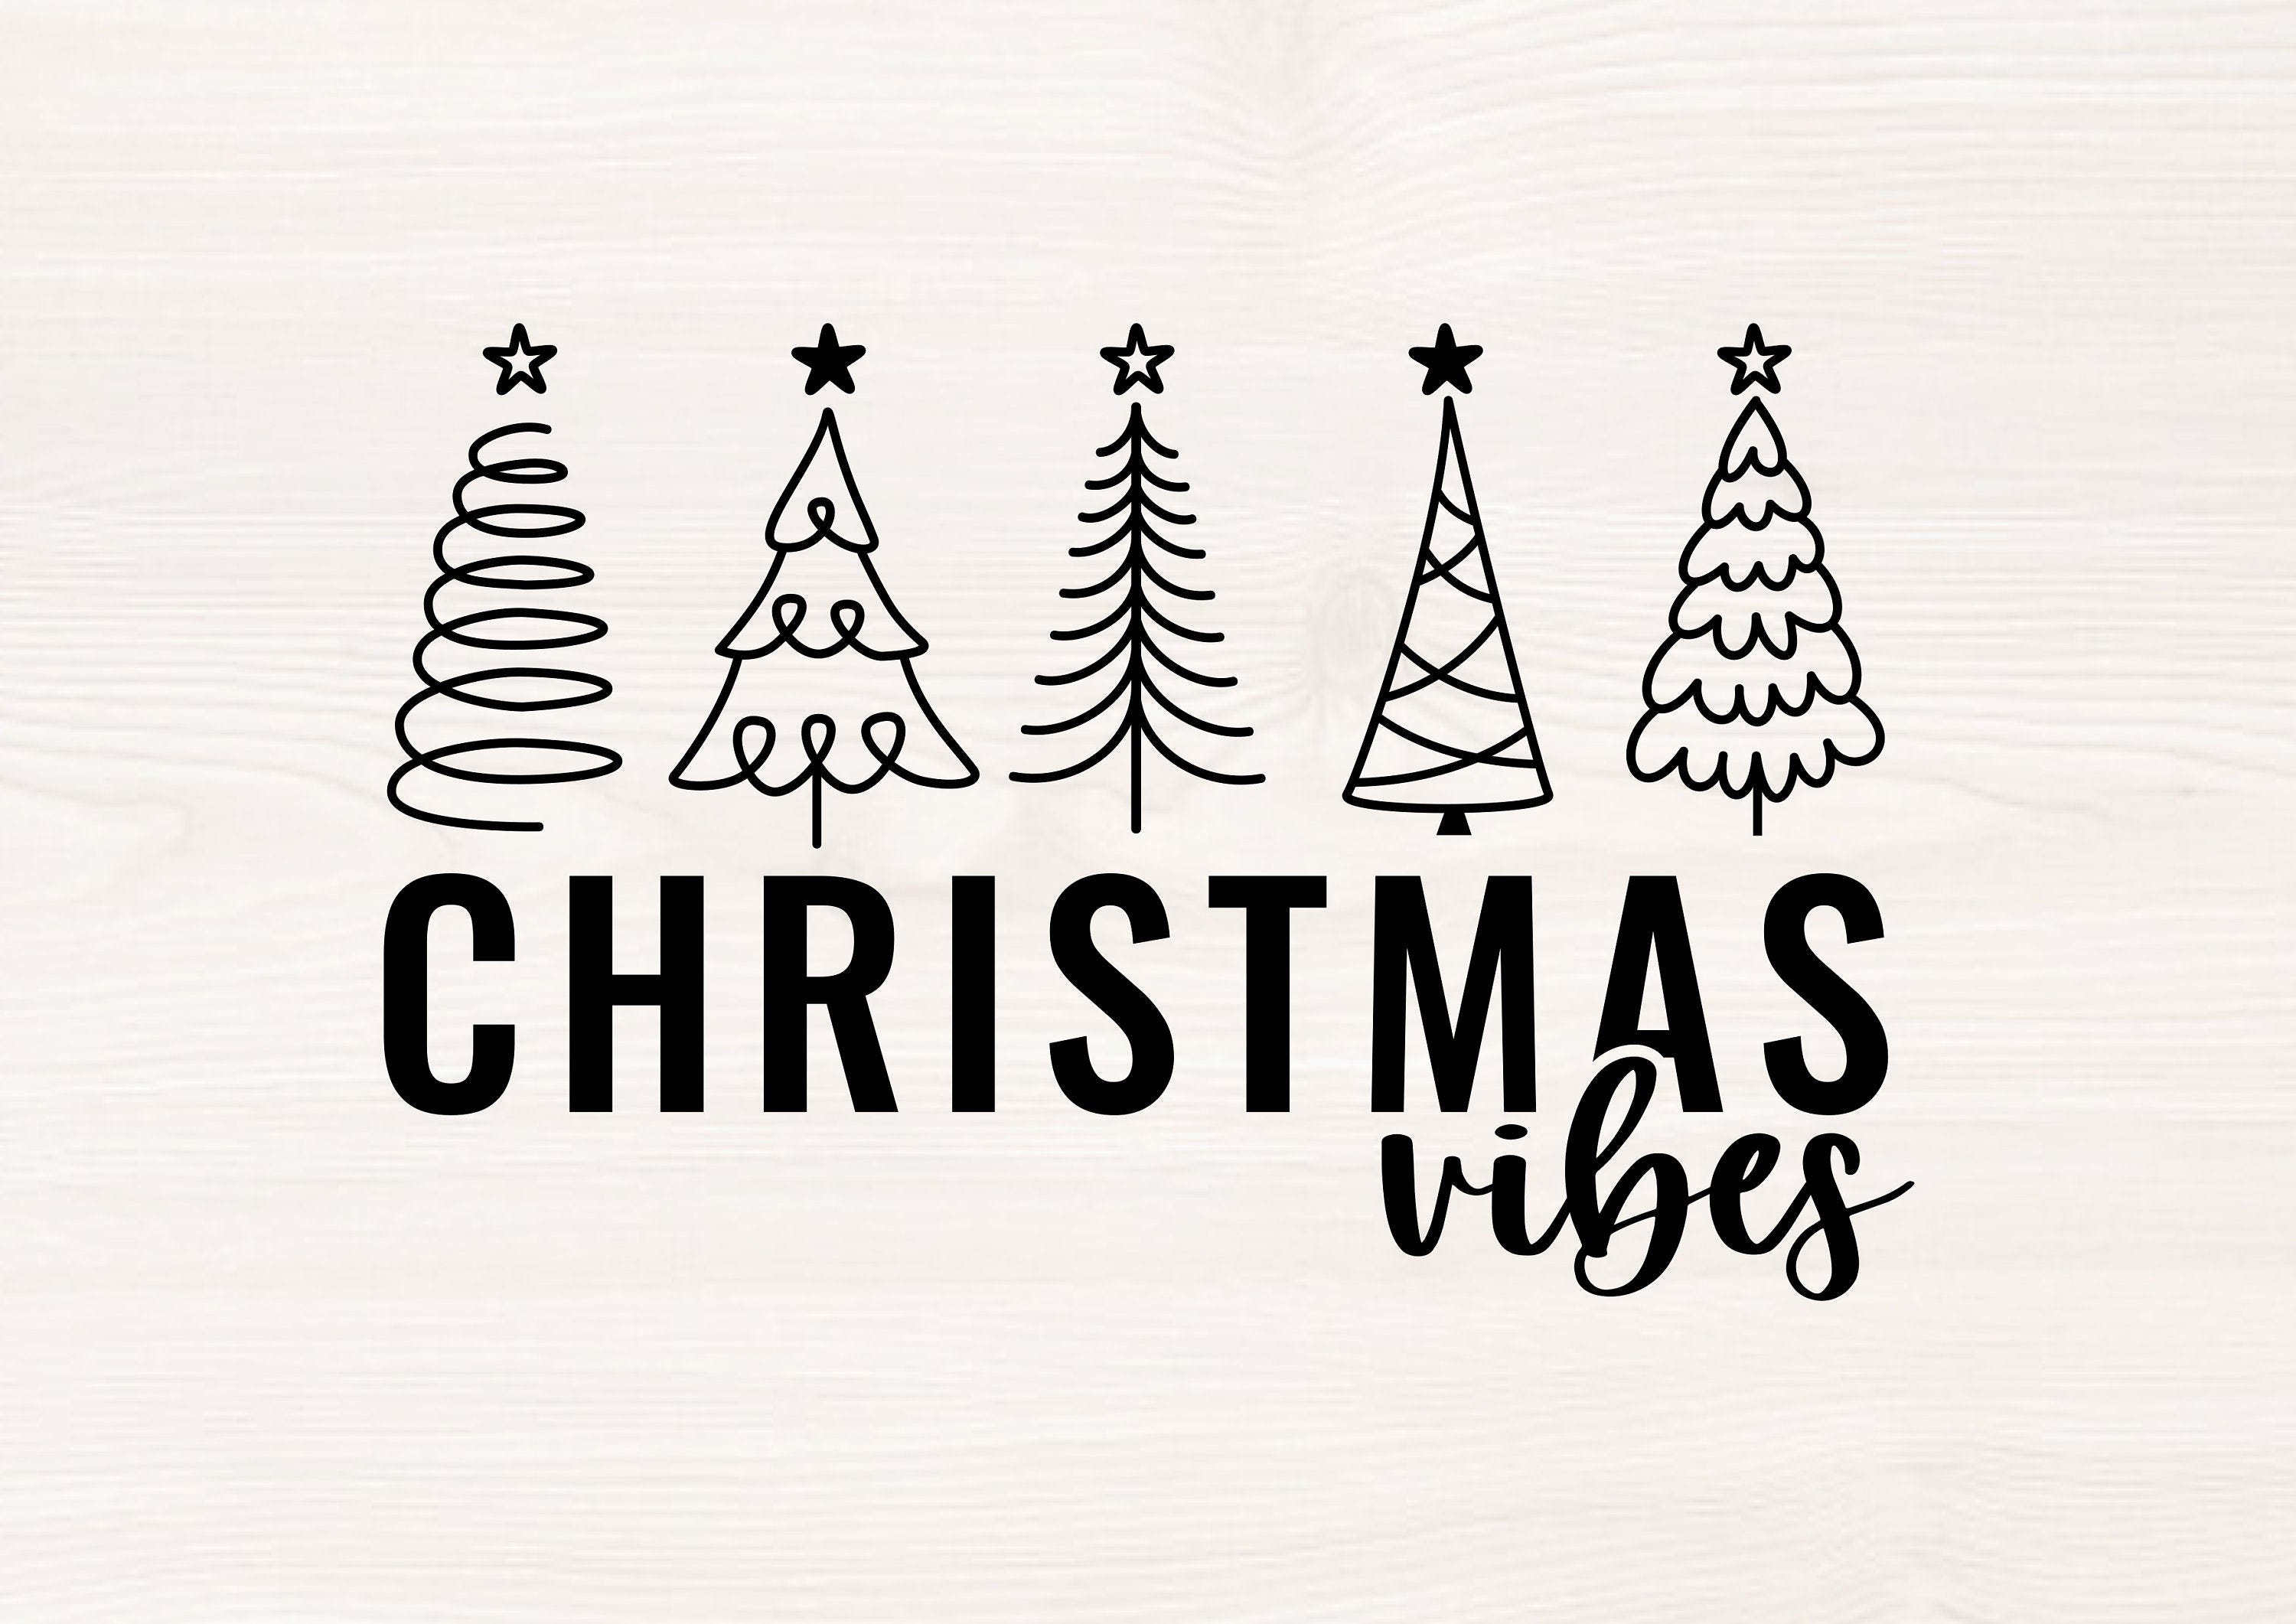 Christmas vibes SVG PNG Files for cutting machines, digital clipart, merry Christmas, hand drawn, whimsical, line drawn Christmas trees